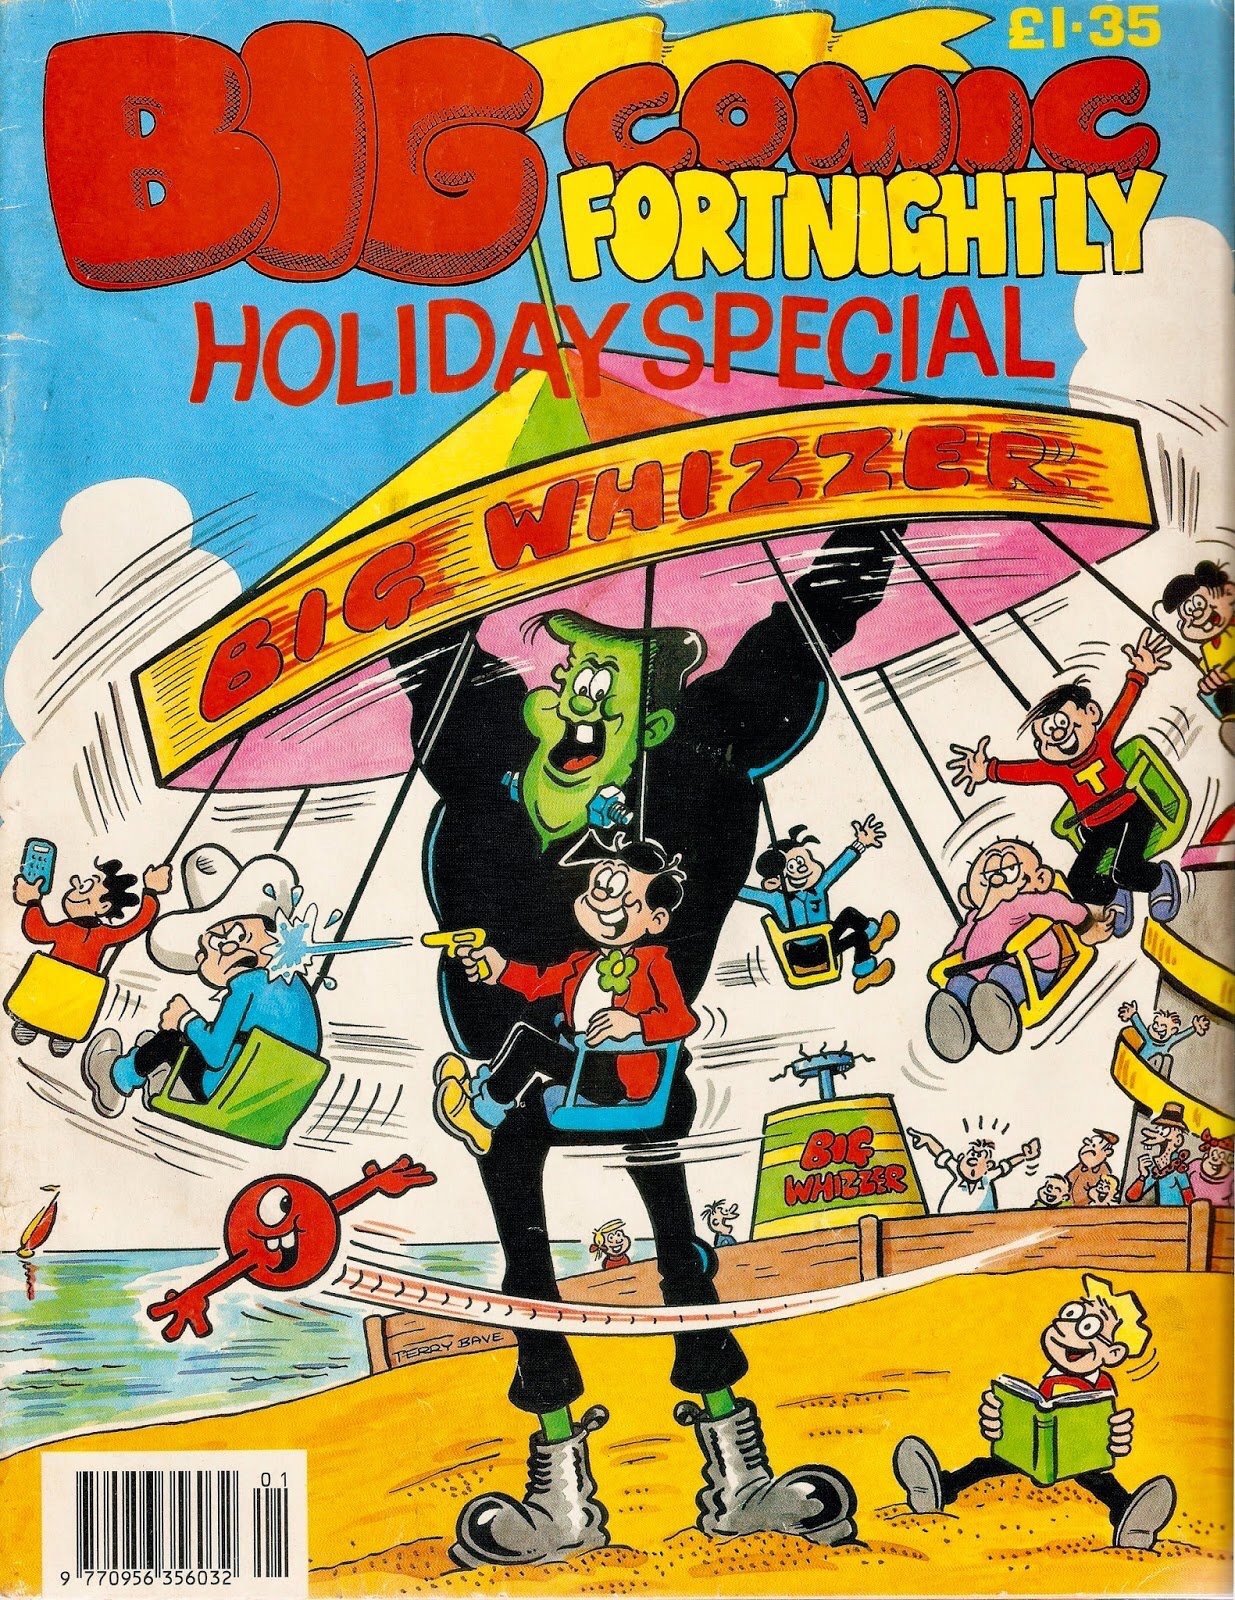 Terry Bave’s cover for the 1994 Big Comic Fortnightly Holiday Special